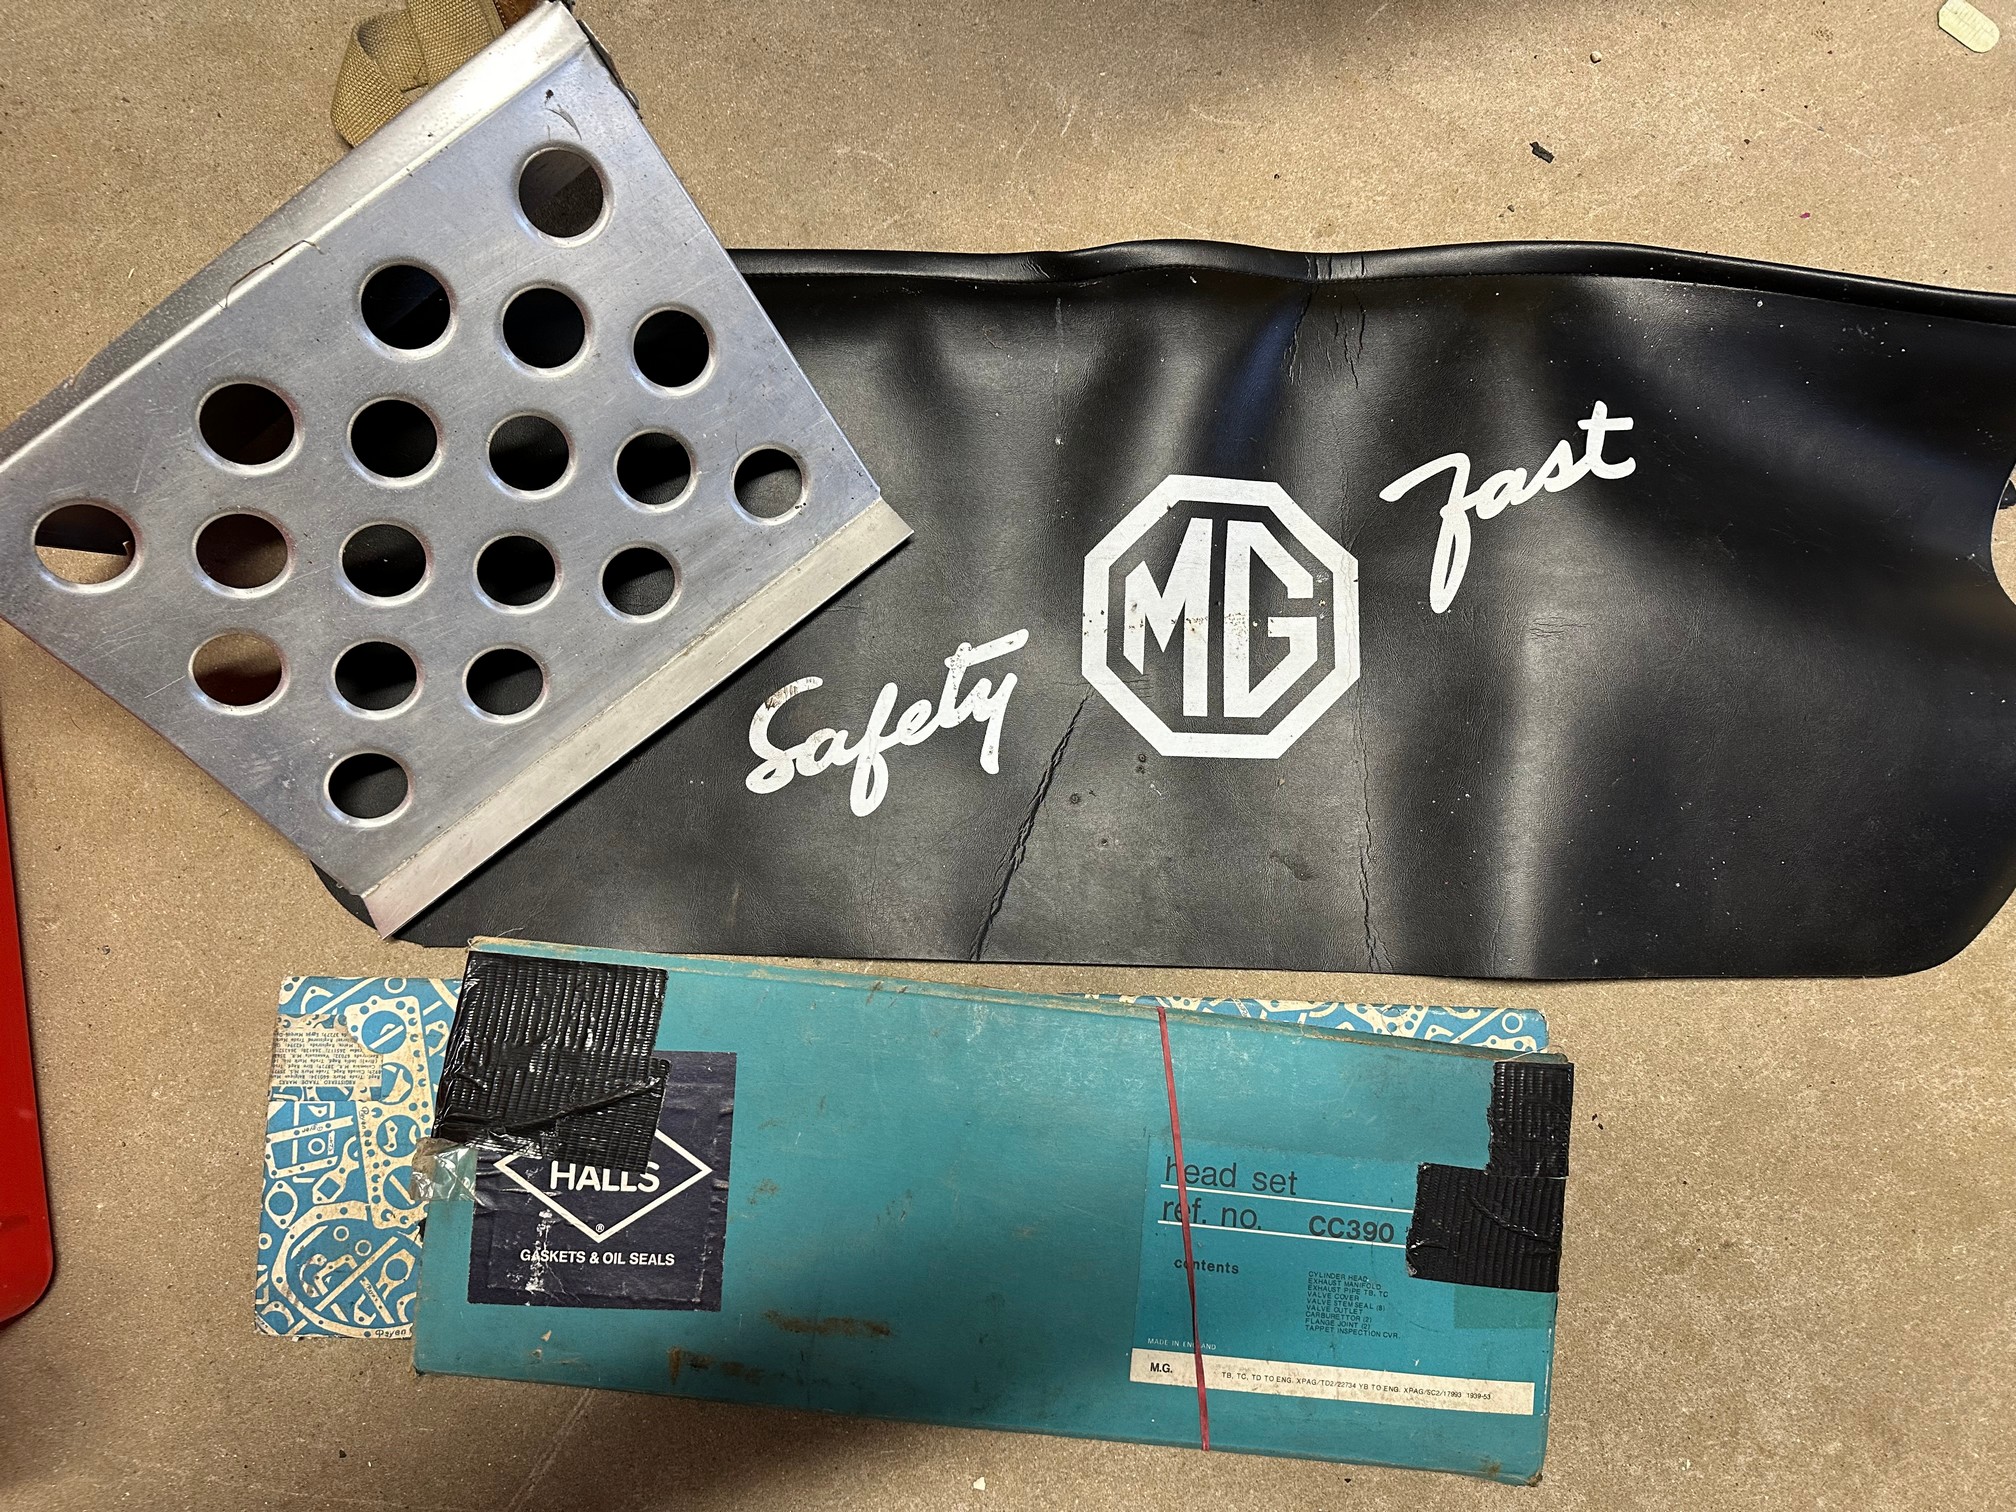 An aluminium rally style passenger foot rest, an MG branded protective bodywork cover, two sets of